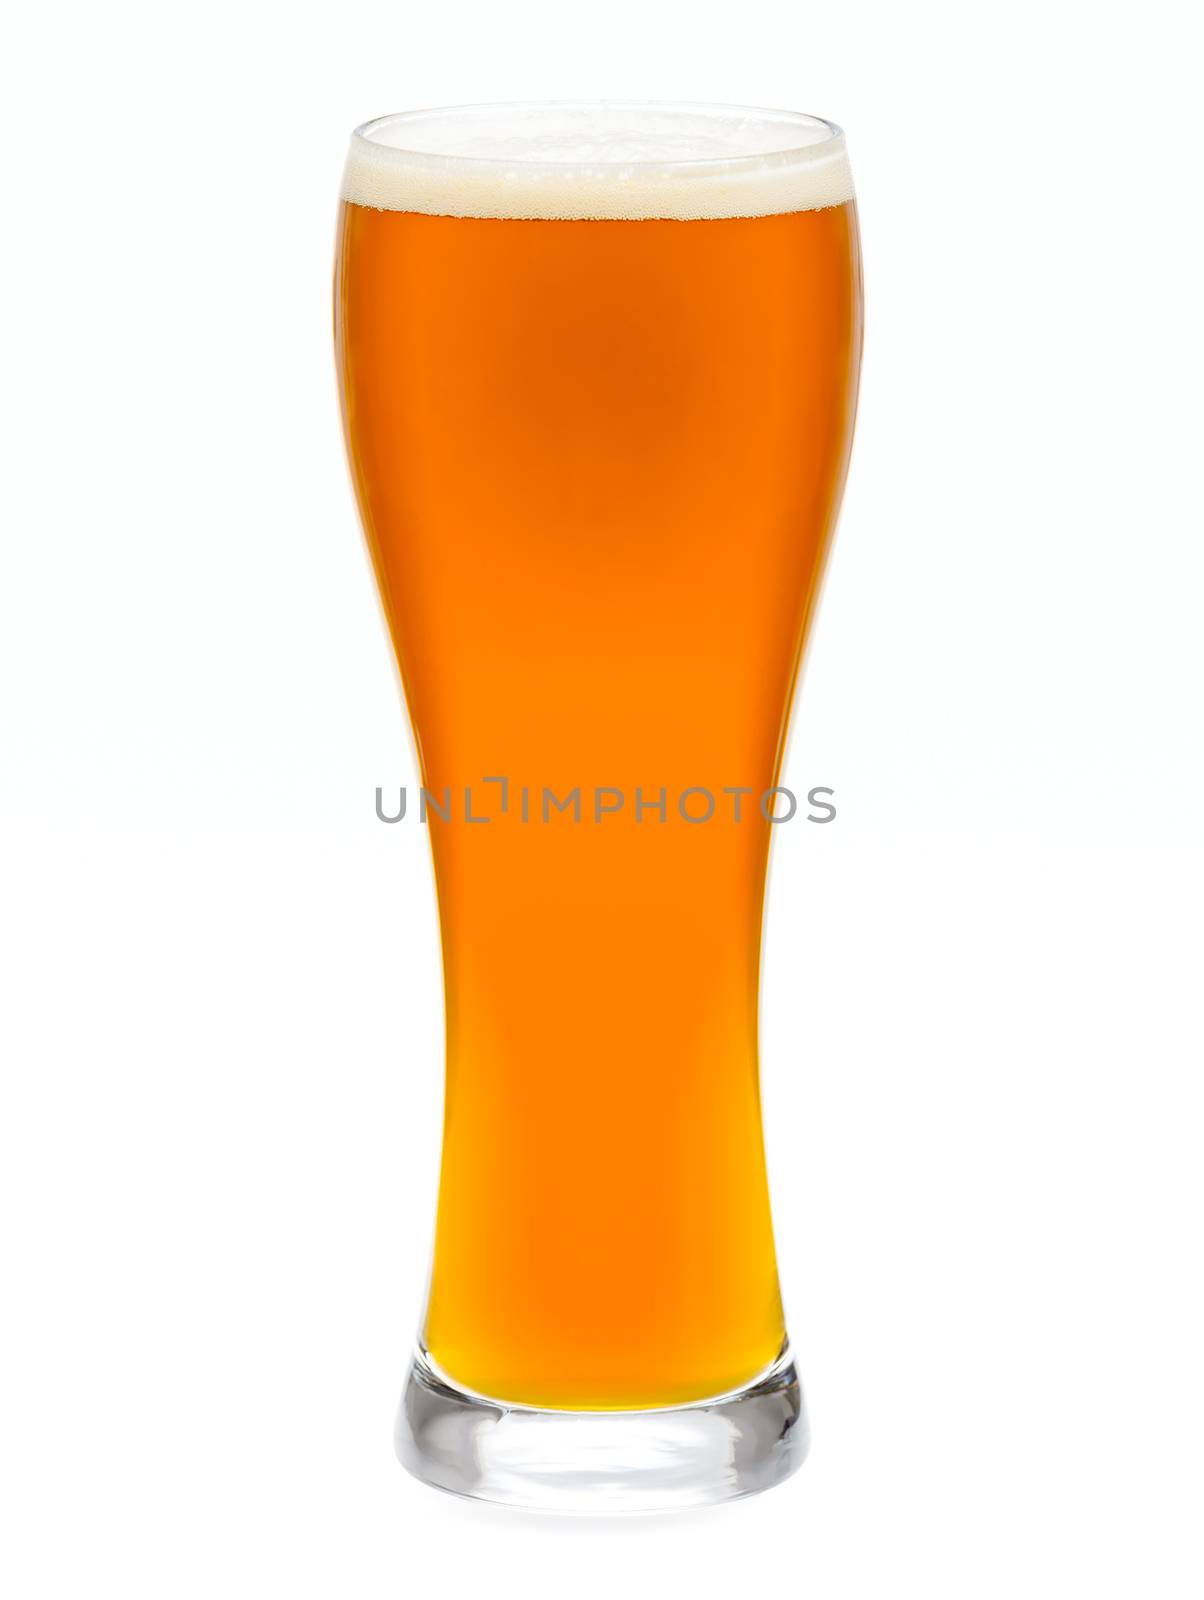 Glass of IPA ale by naumoid